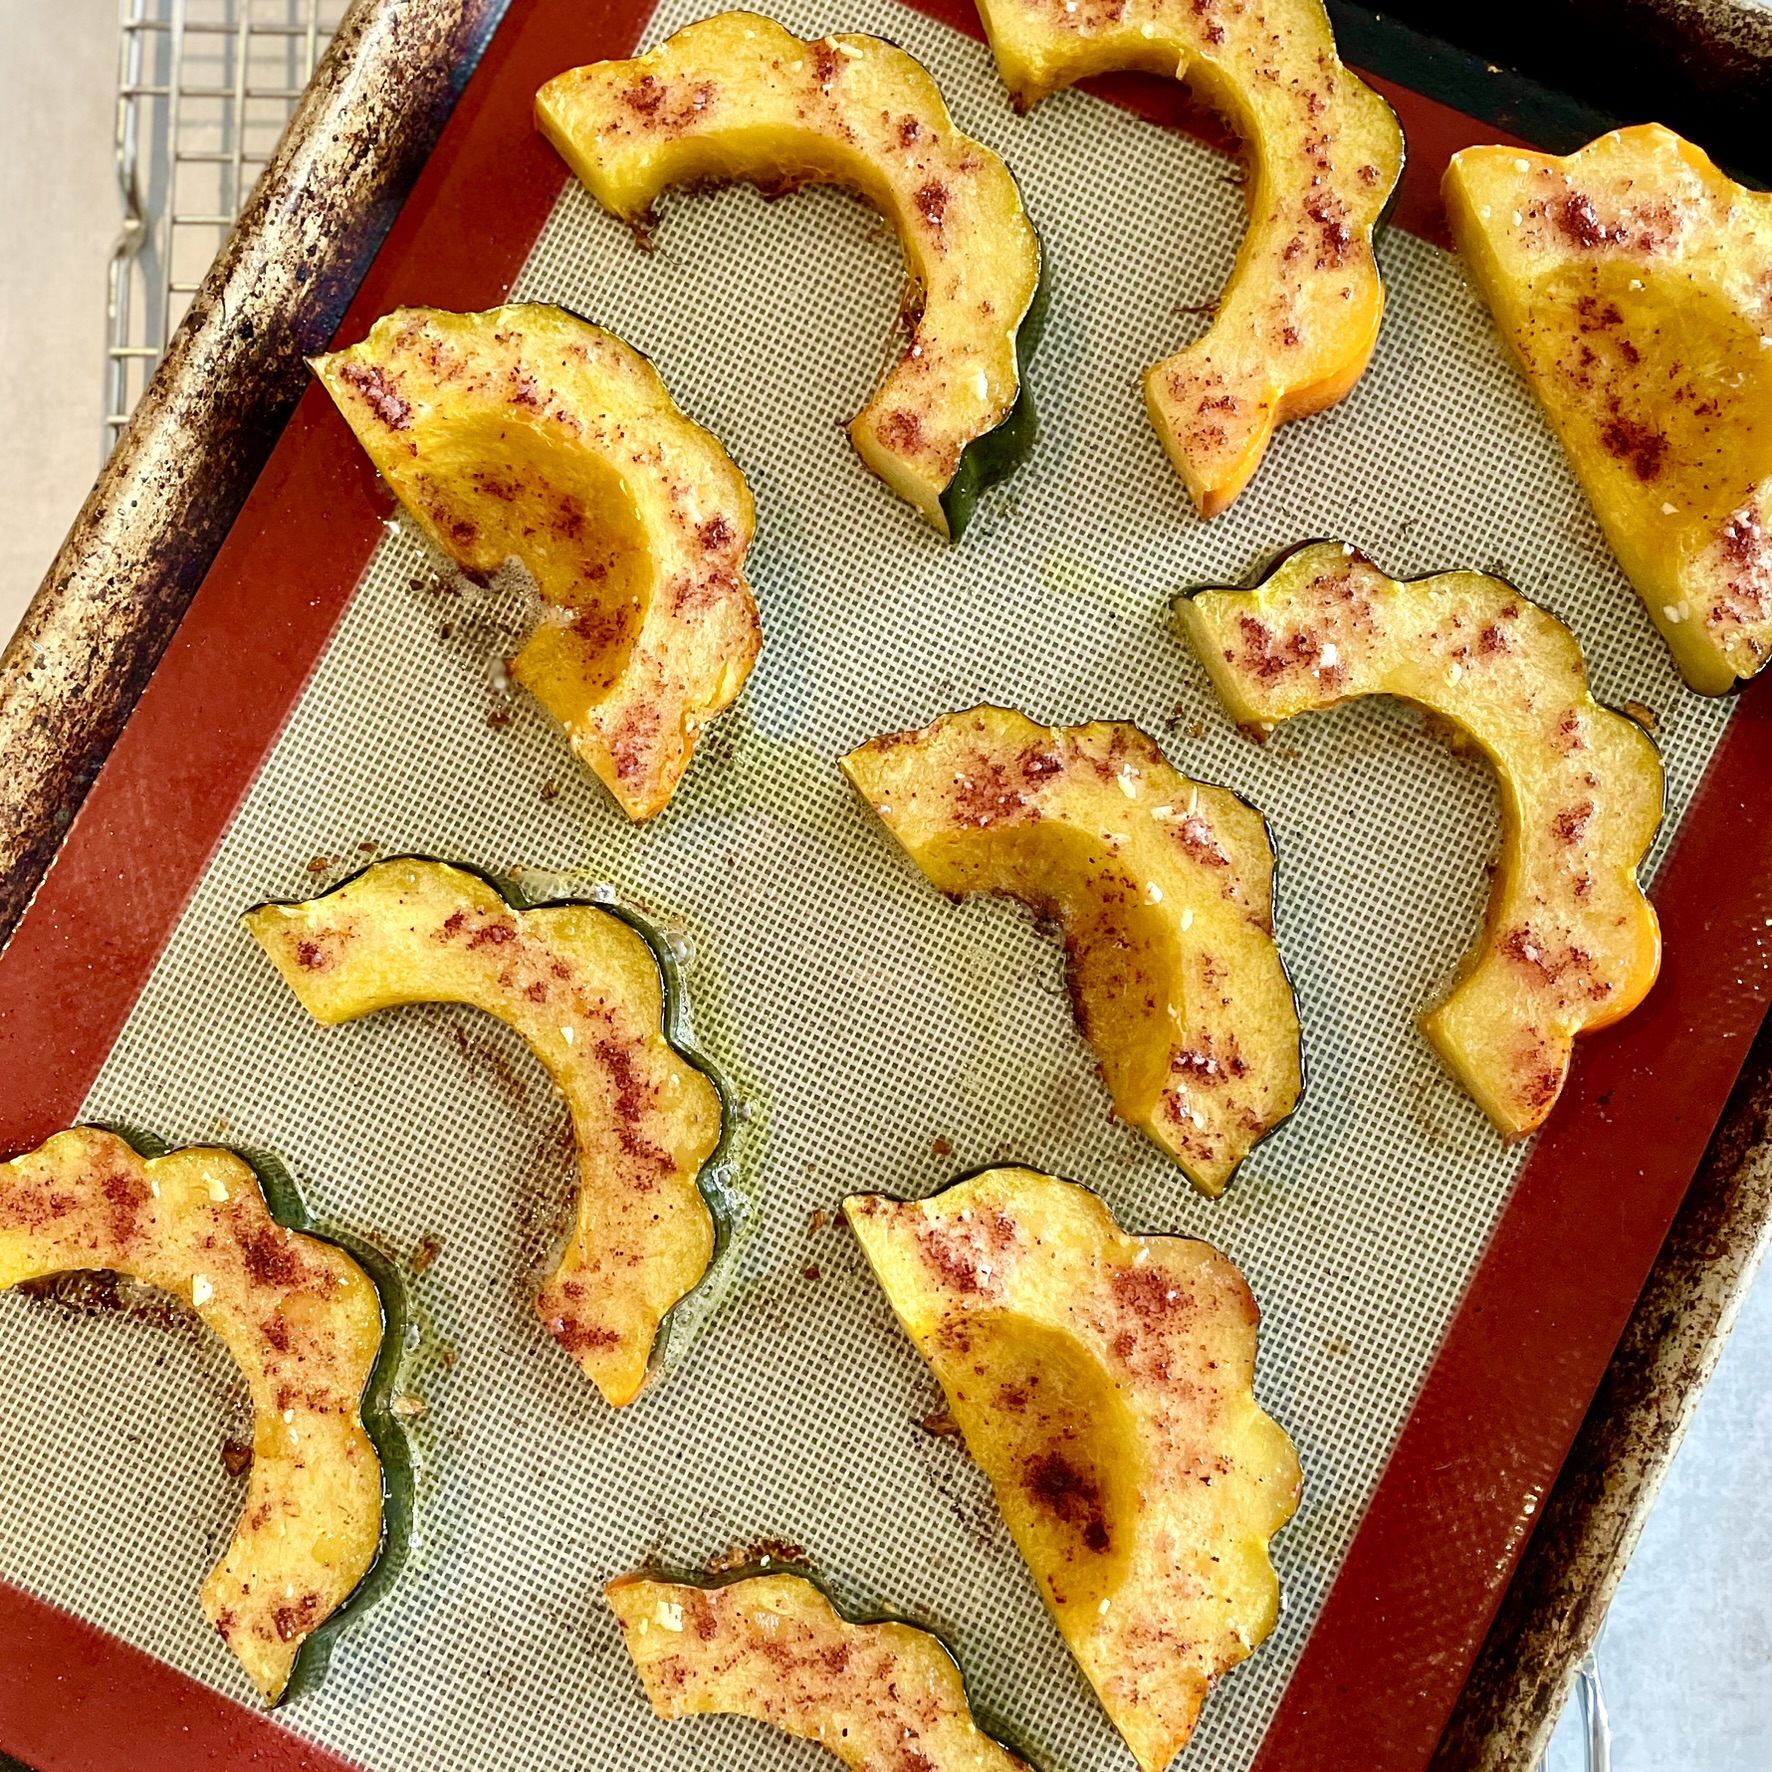 seasoned roasted acorn squash slices on a Silpat-lined baking sheet